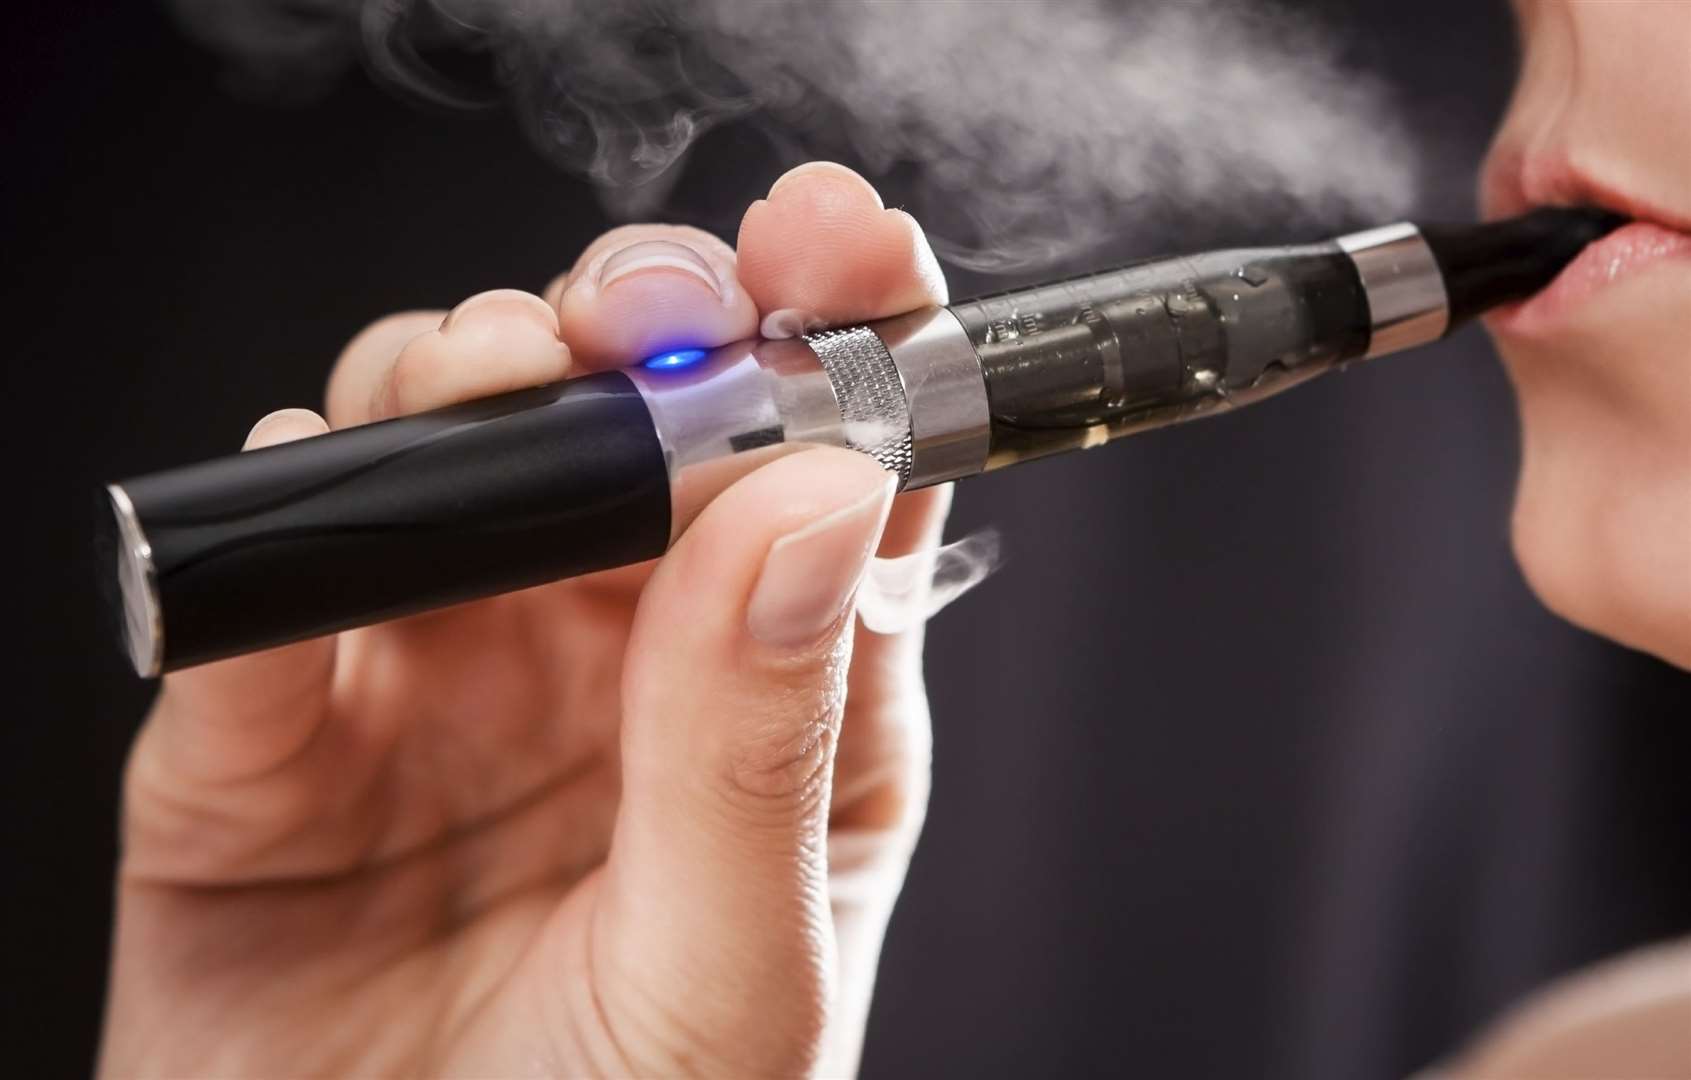 The blaze started when an e-cigarette was left on charge. Picture: istock